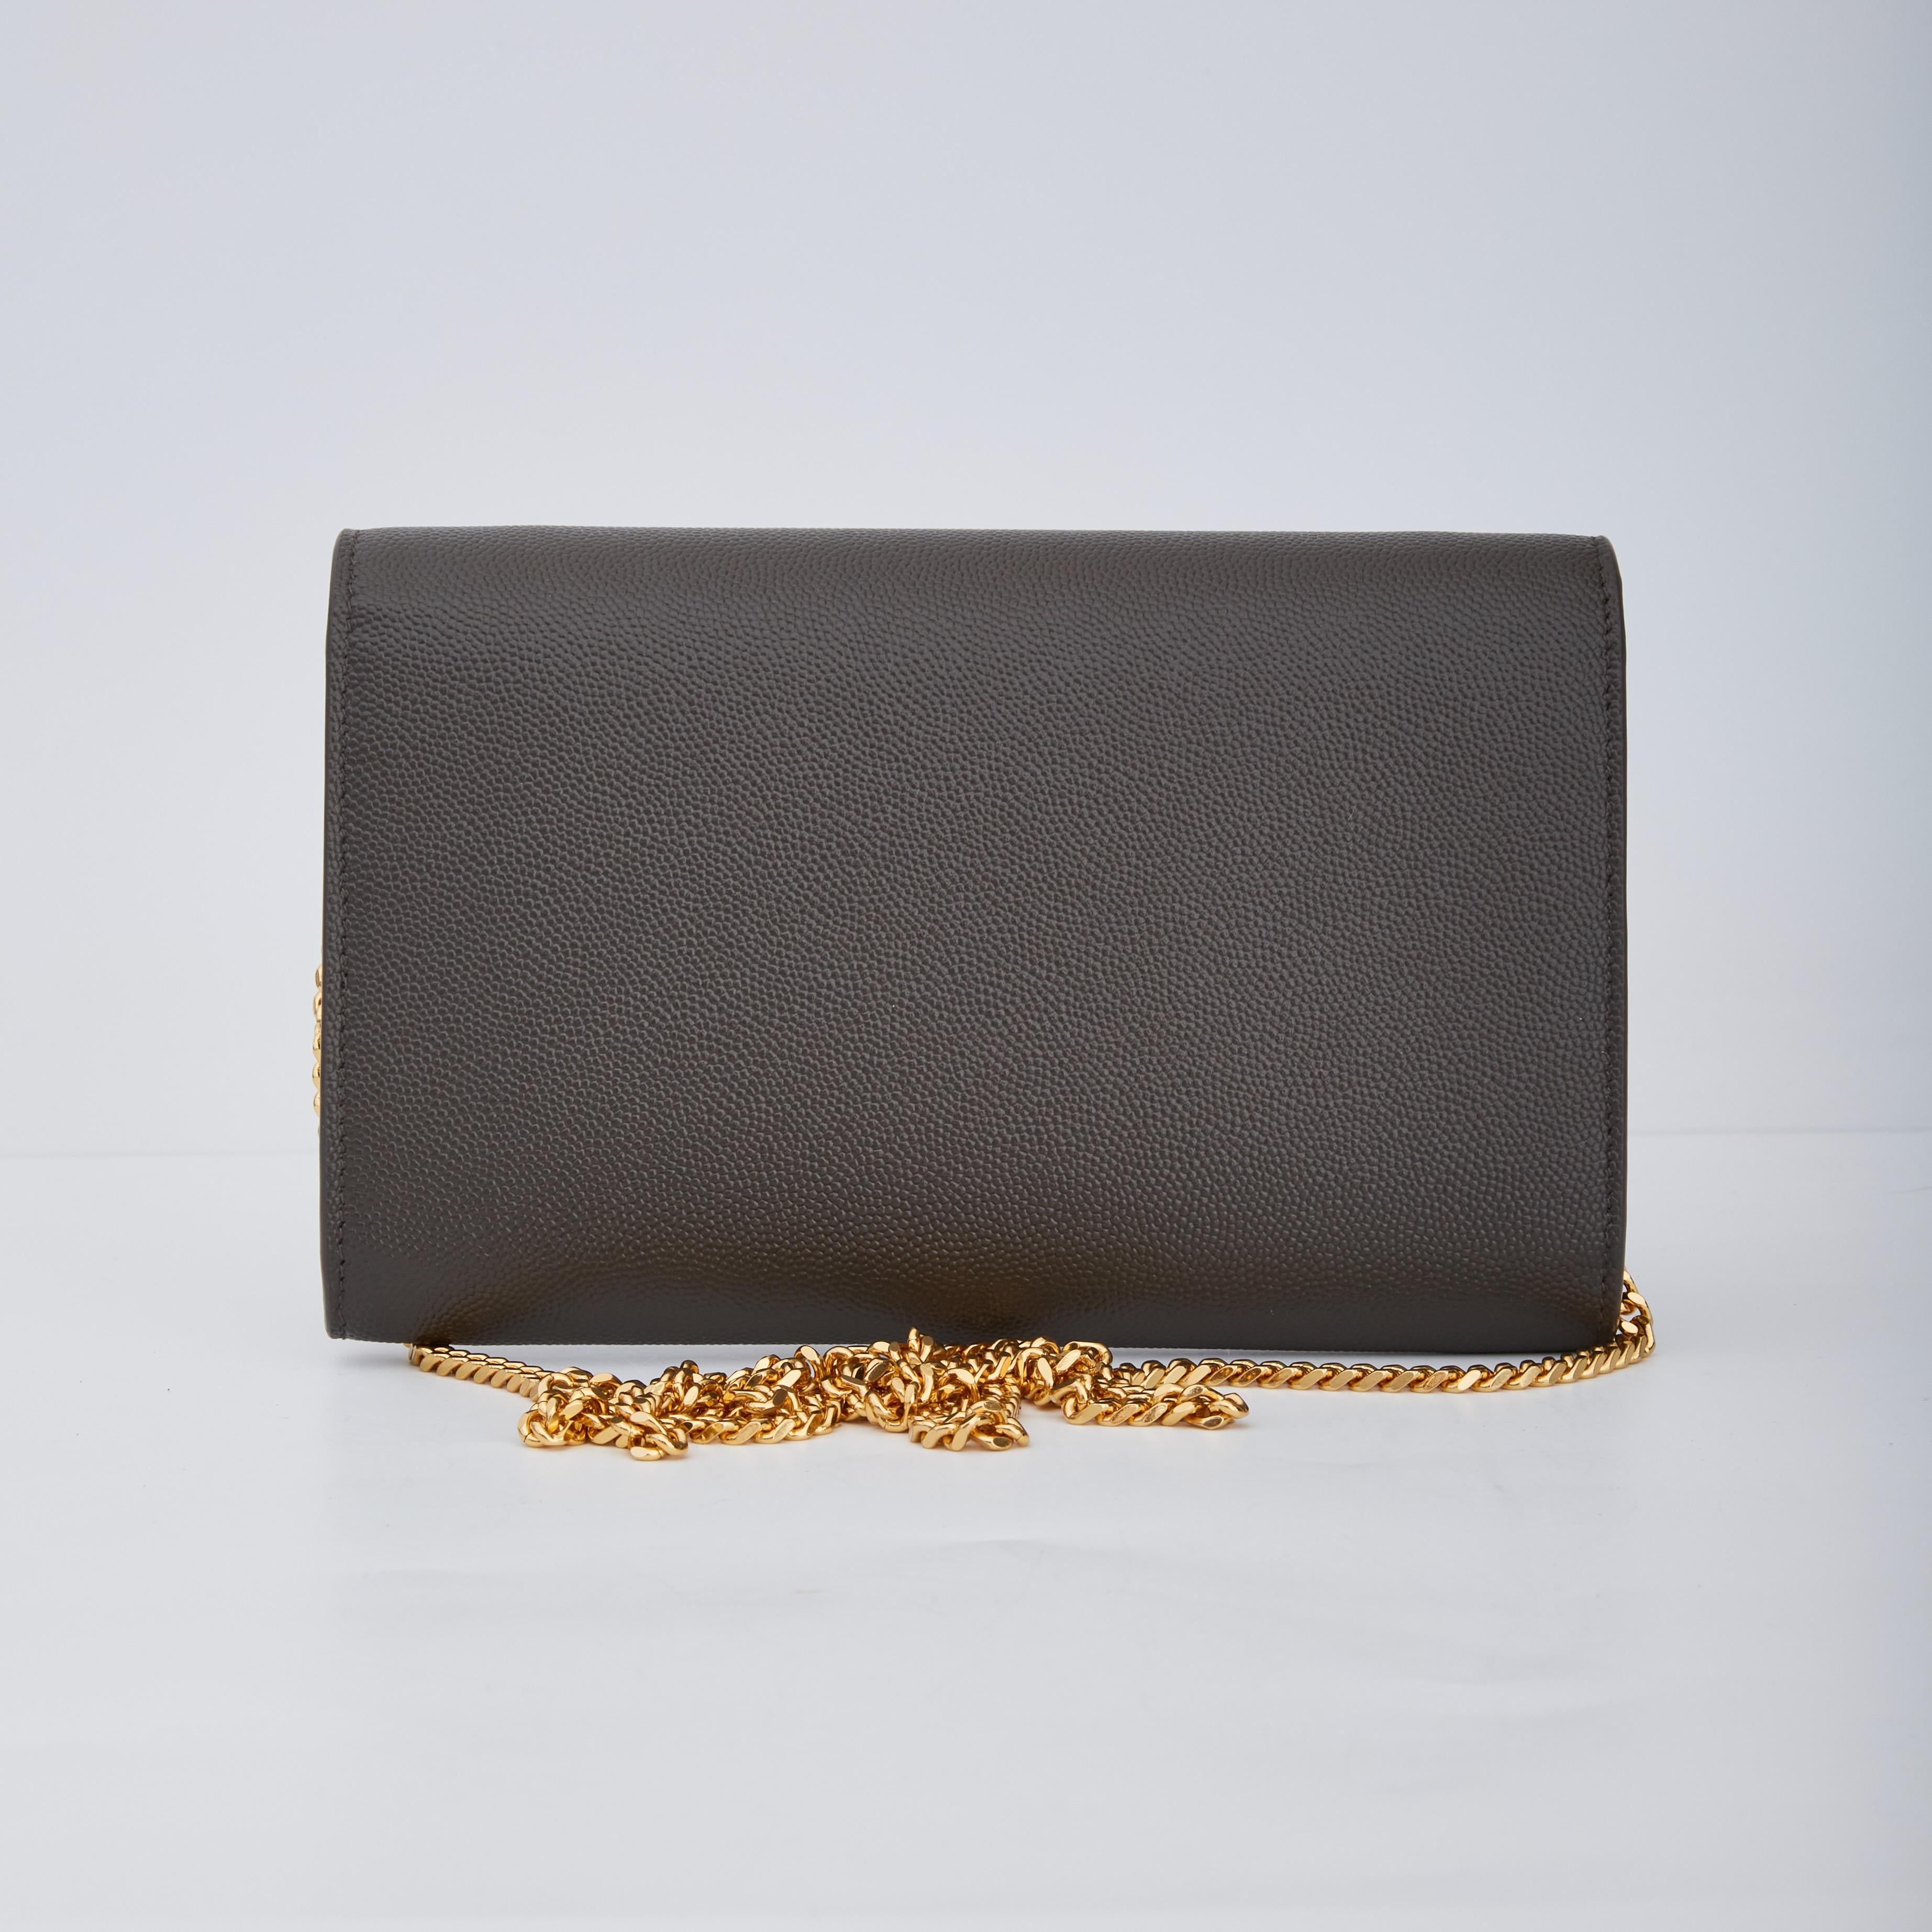 This Saint Laurent envelope flap Bag is from 2020 and is made with Grain De Poudre calfskin leather in anthracite grey. The bag features a fold over front envelope flap, shiny gold tone hardware, the signature YSL logo plaque and a chain-link